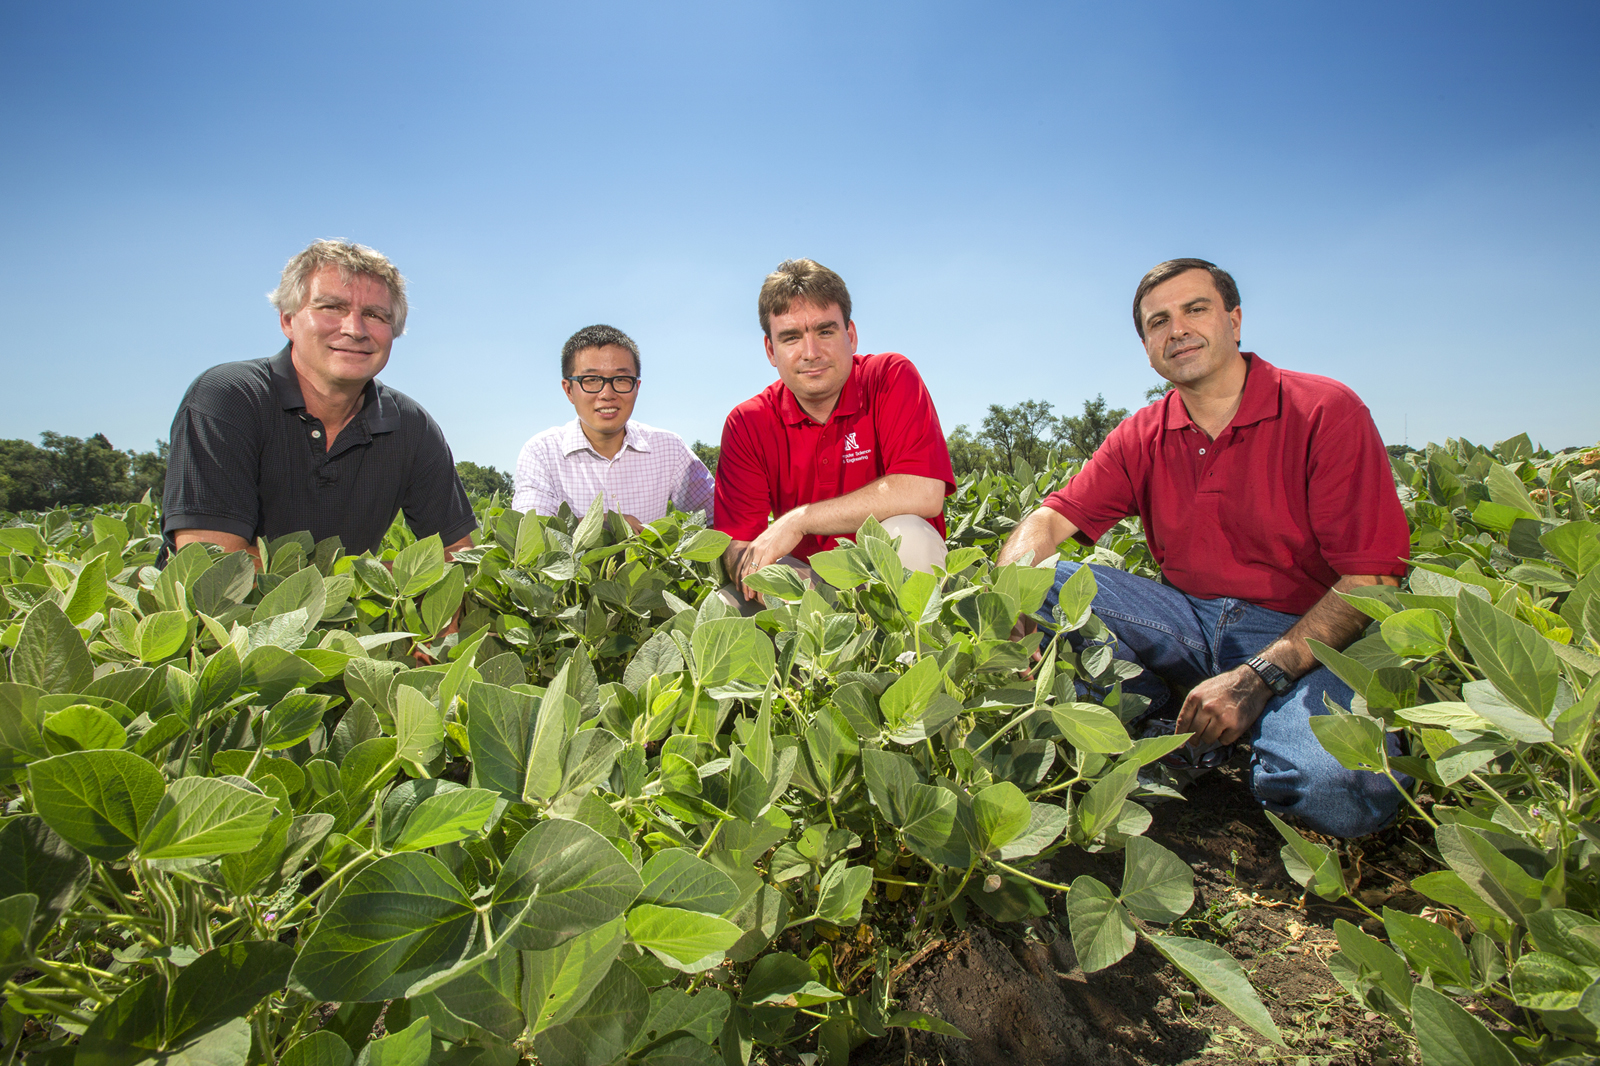 Stephen Reichenbach (from left), Xin Dong, Mehmet Can Vuran and Suat Irmak are working on a project to develop wireless underground sensor networks to give agricultural producers real-time information about soil moisture and changing conditions that would